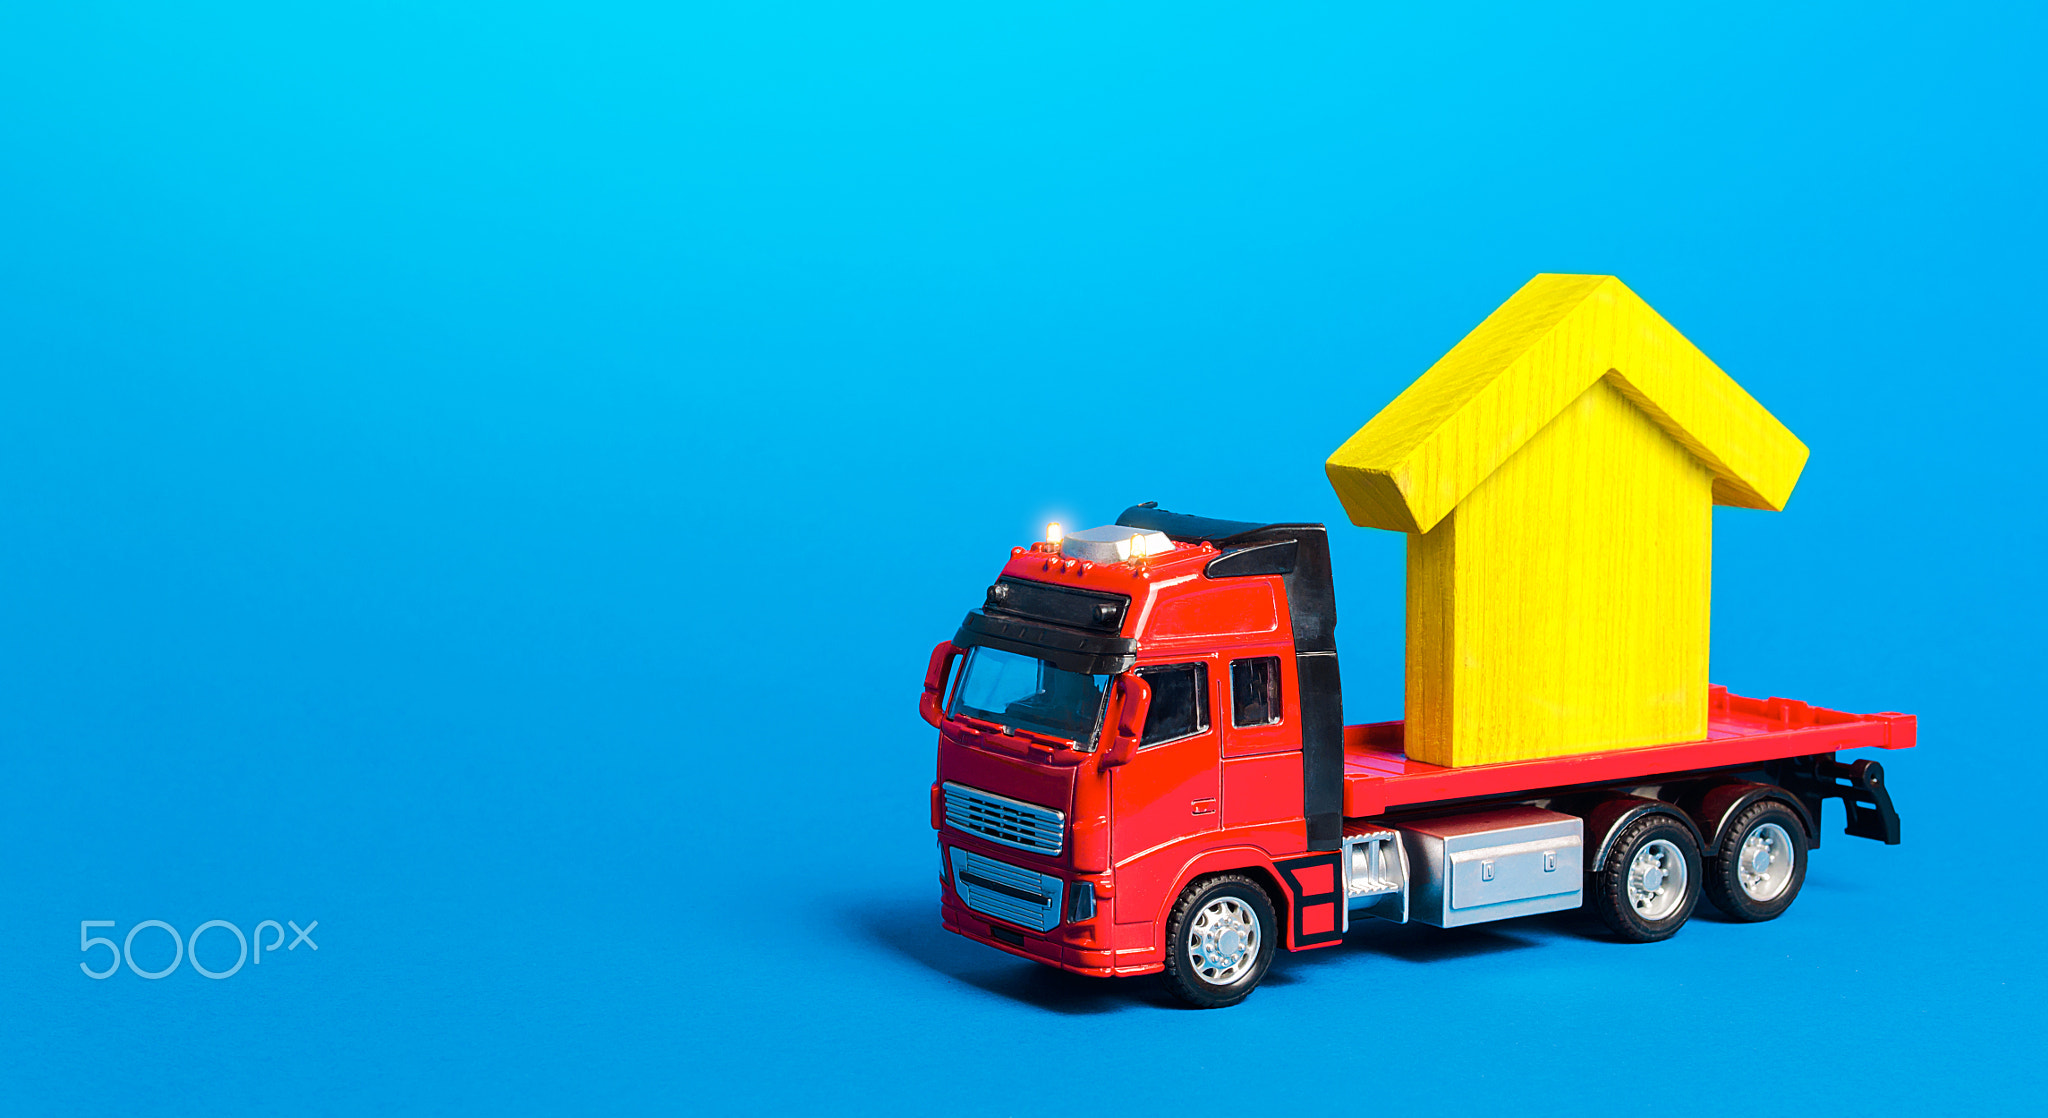 Red freight truck carrier with a yellow house figure.